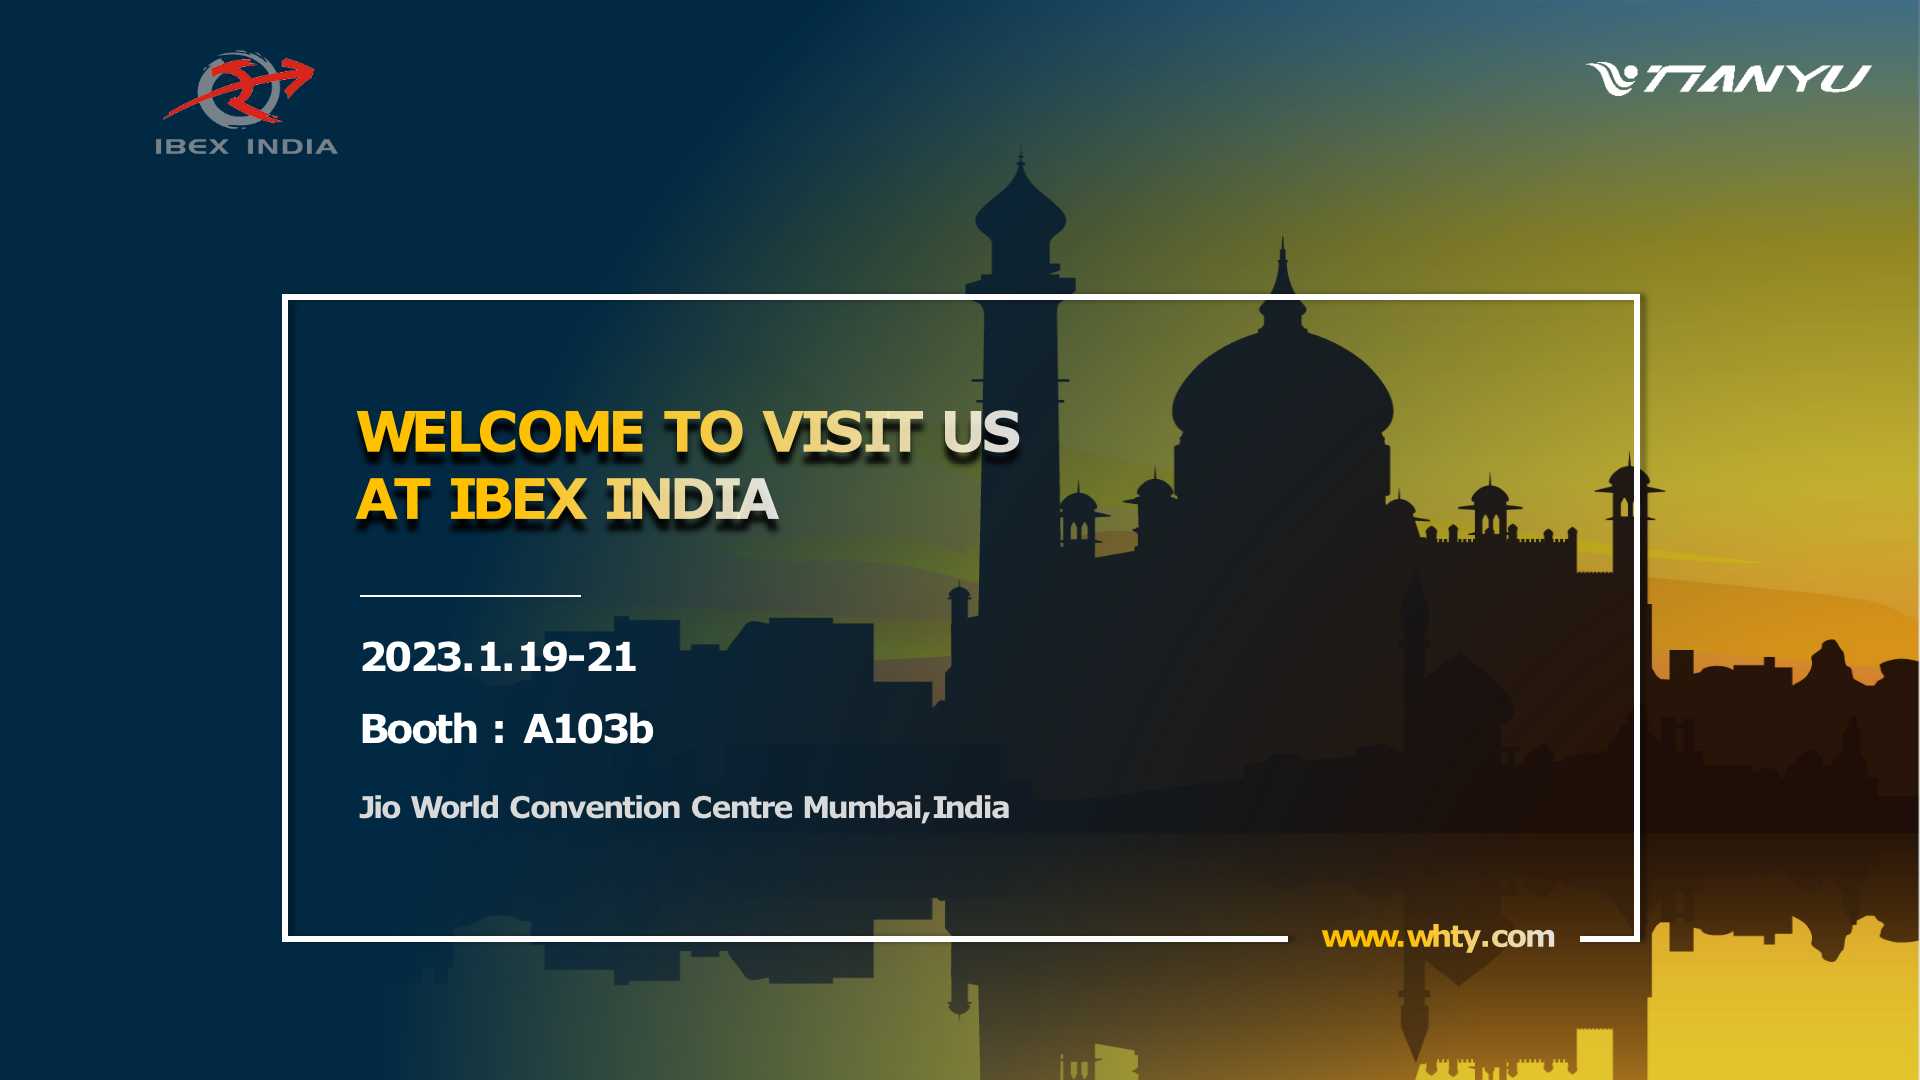 Tianyu at IBEX INDIA 2023: Showcasing Innovations in the BFSI Tech & Fintech Industry